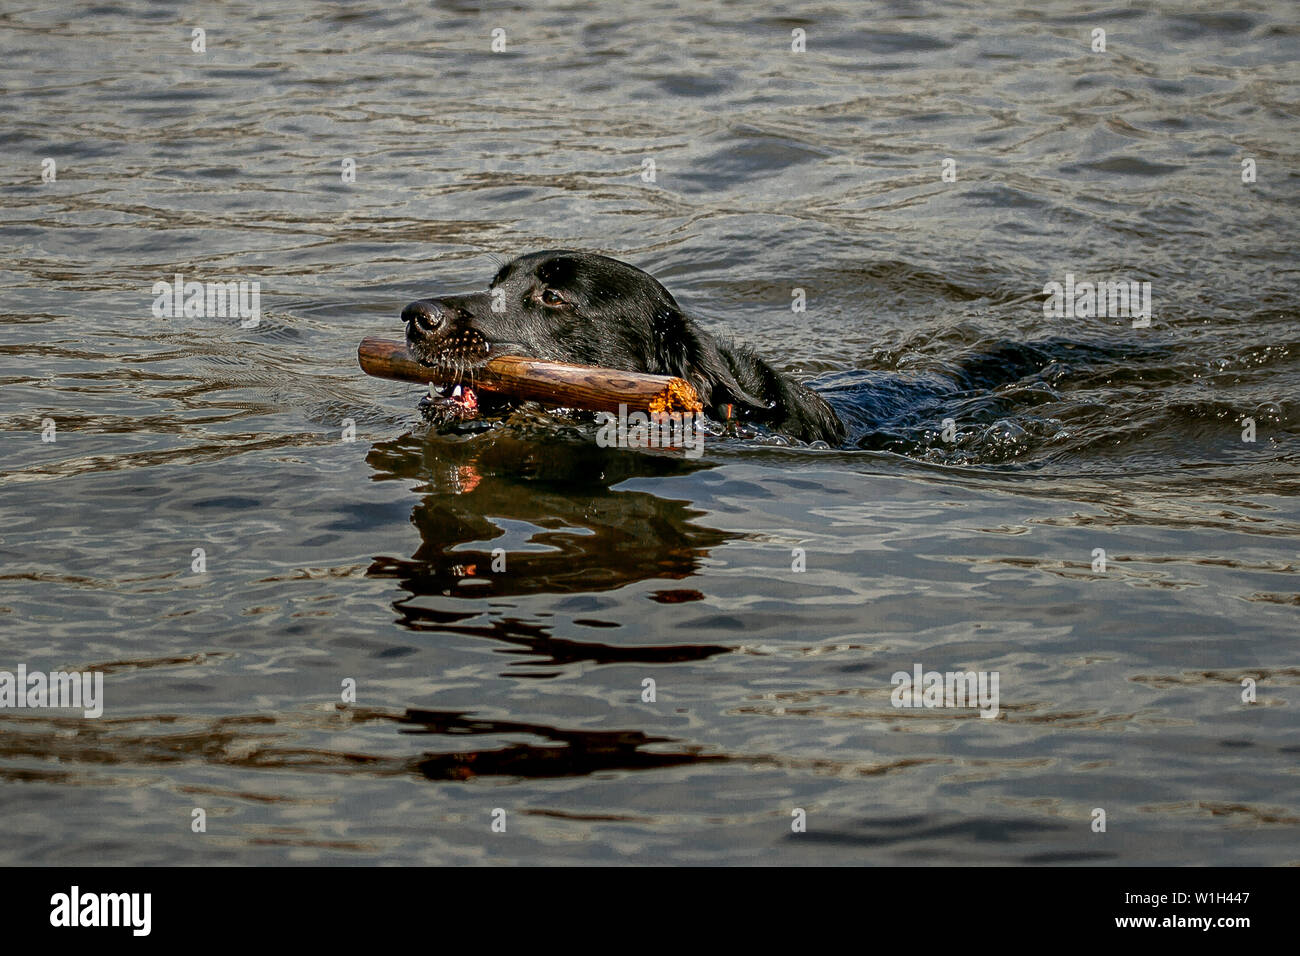 A dog with a stick floating in the water Stock Photo